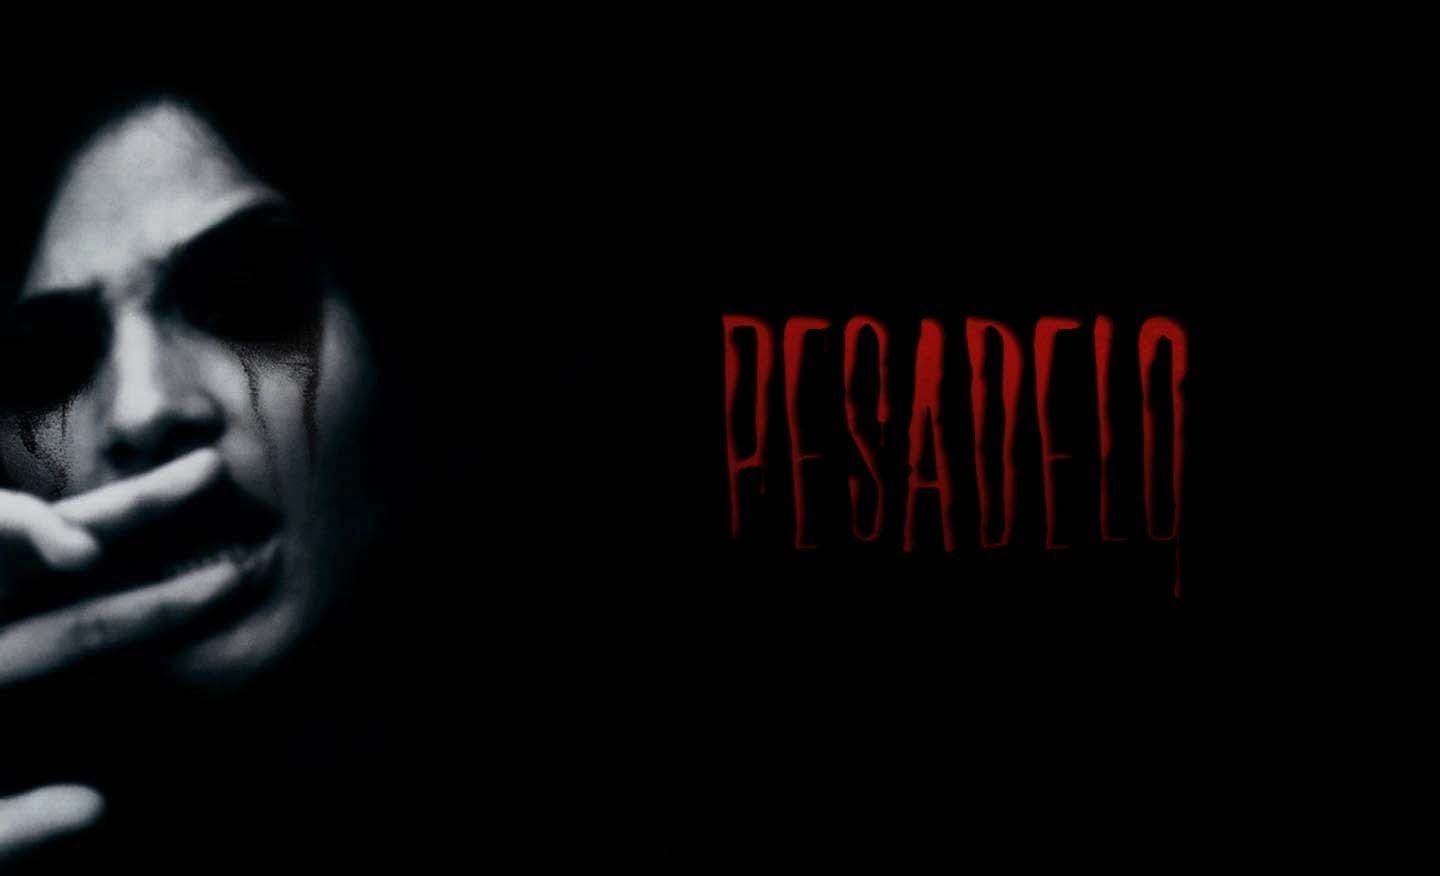 Pesadelo Indie Horror Game Dam That Jump Scare Made Me